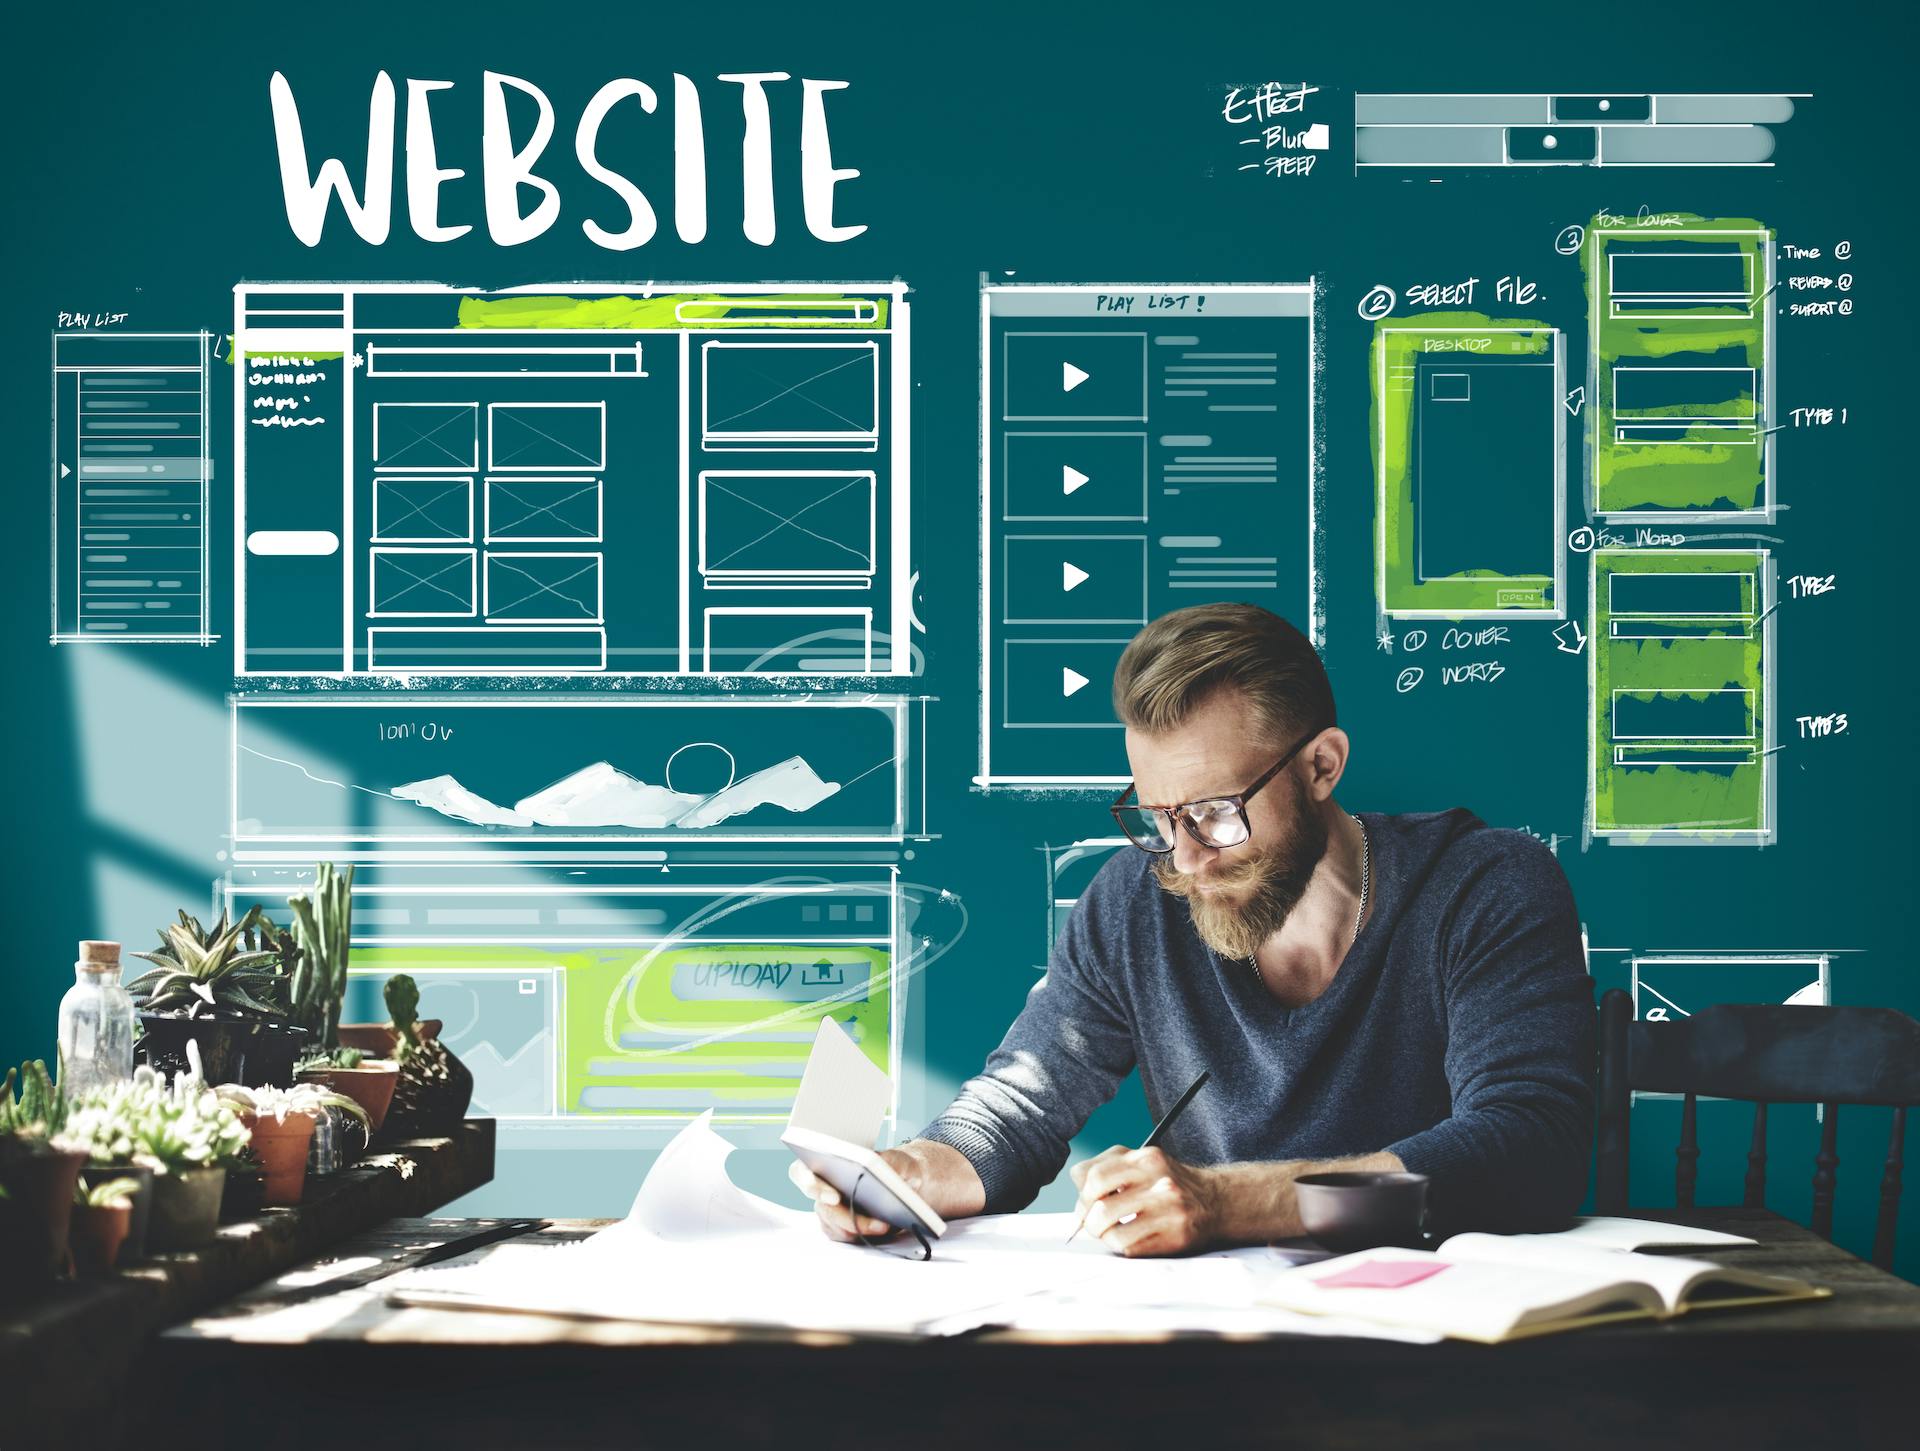 Stock photo of man at desk with graphic overlay of web design layout sketches in the background